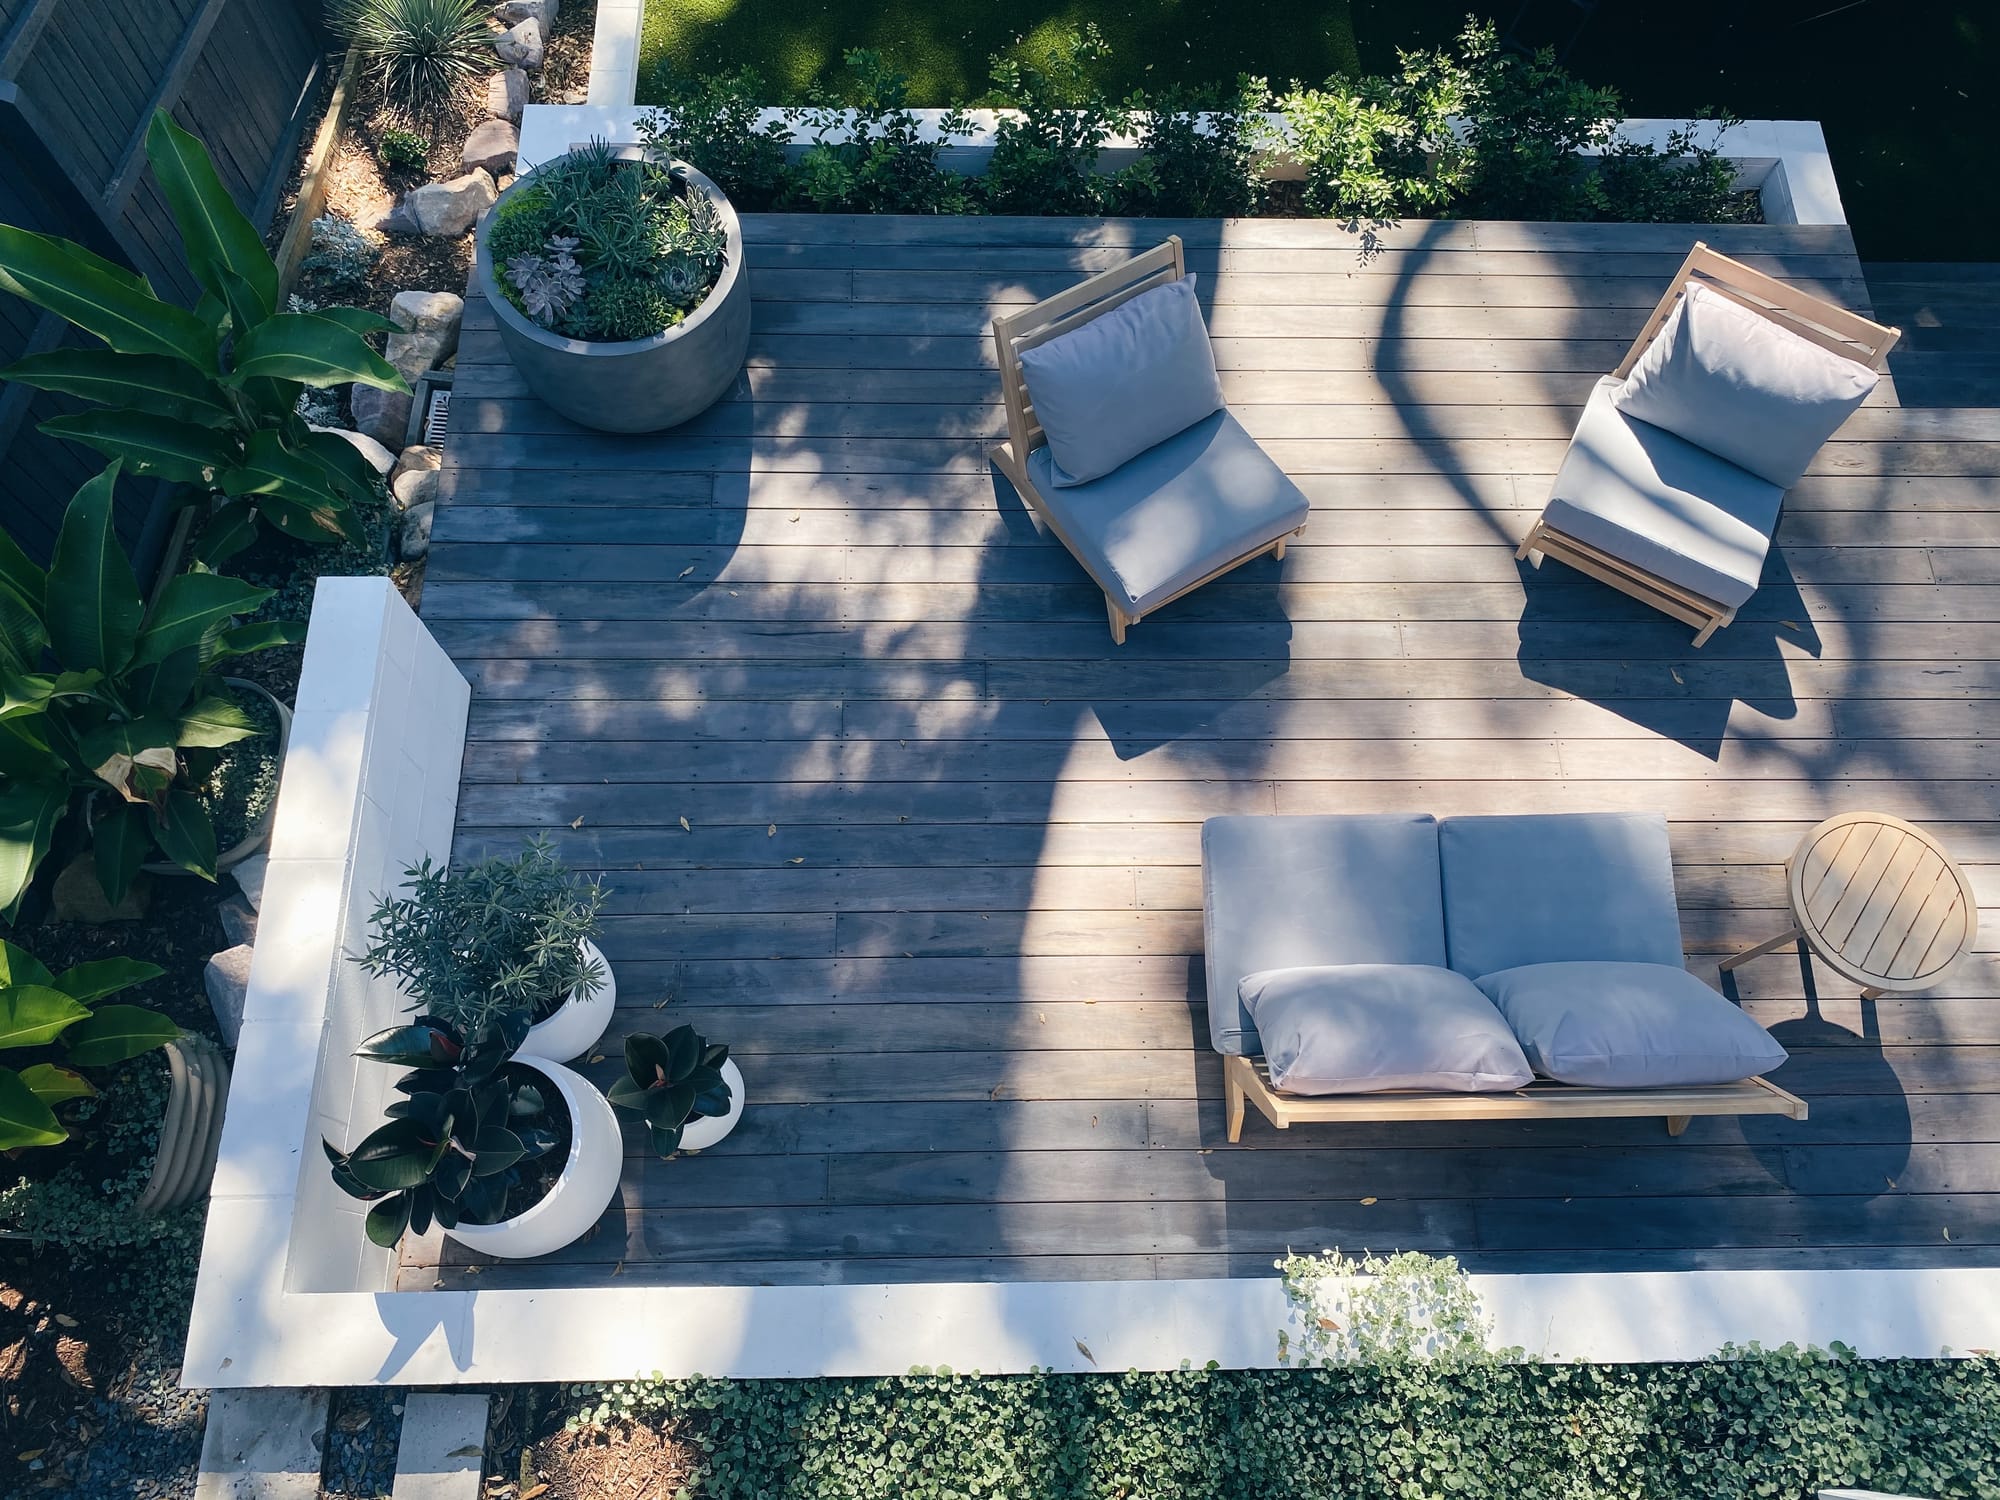 Change Your Deck’s Entire Look with These Cost-Effective Ways